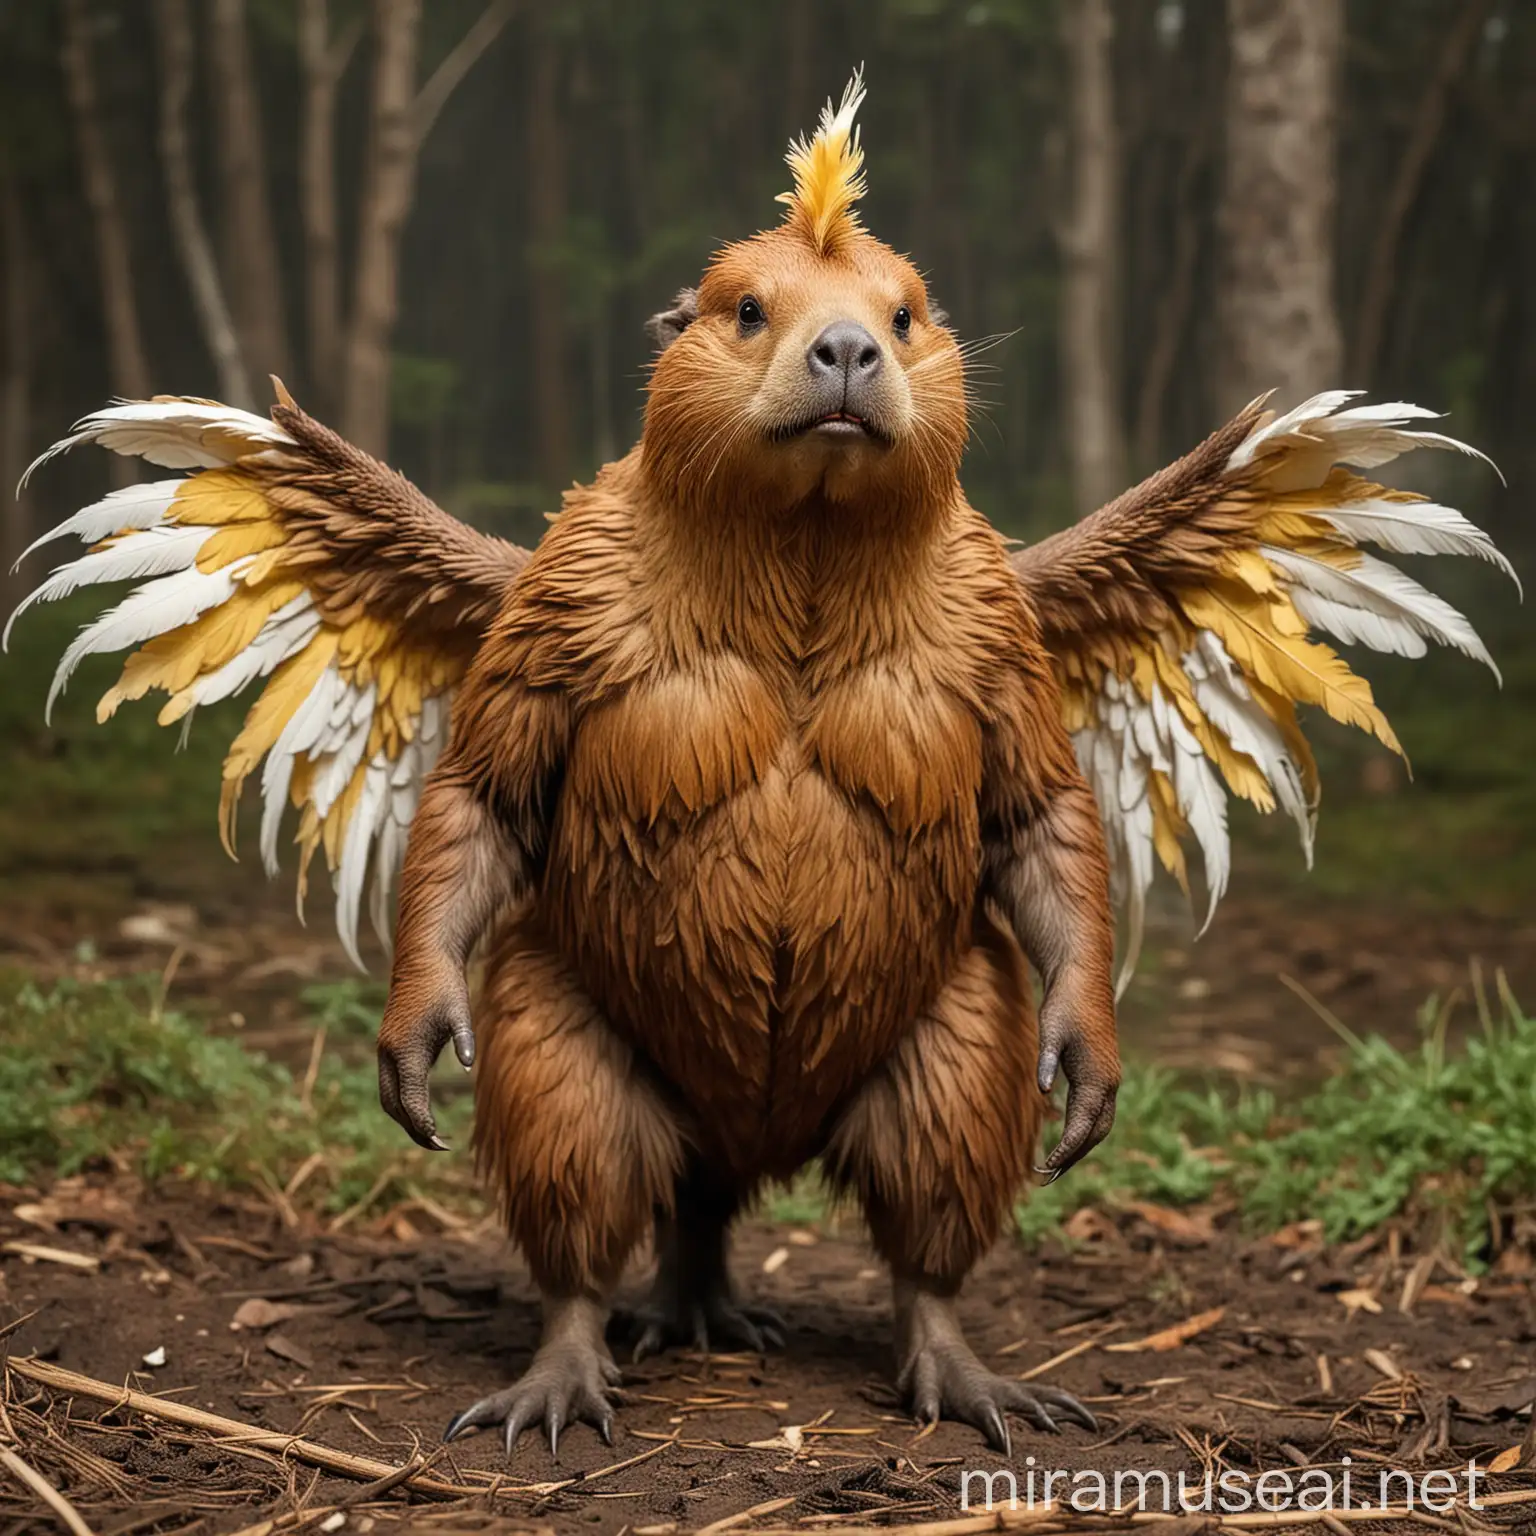 Unique Hybrid Creature BeaverChicken Hybrid with Mammoth Head Tusks and Chicken Wings